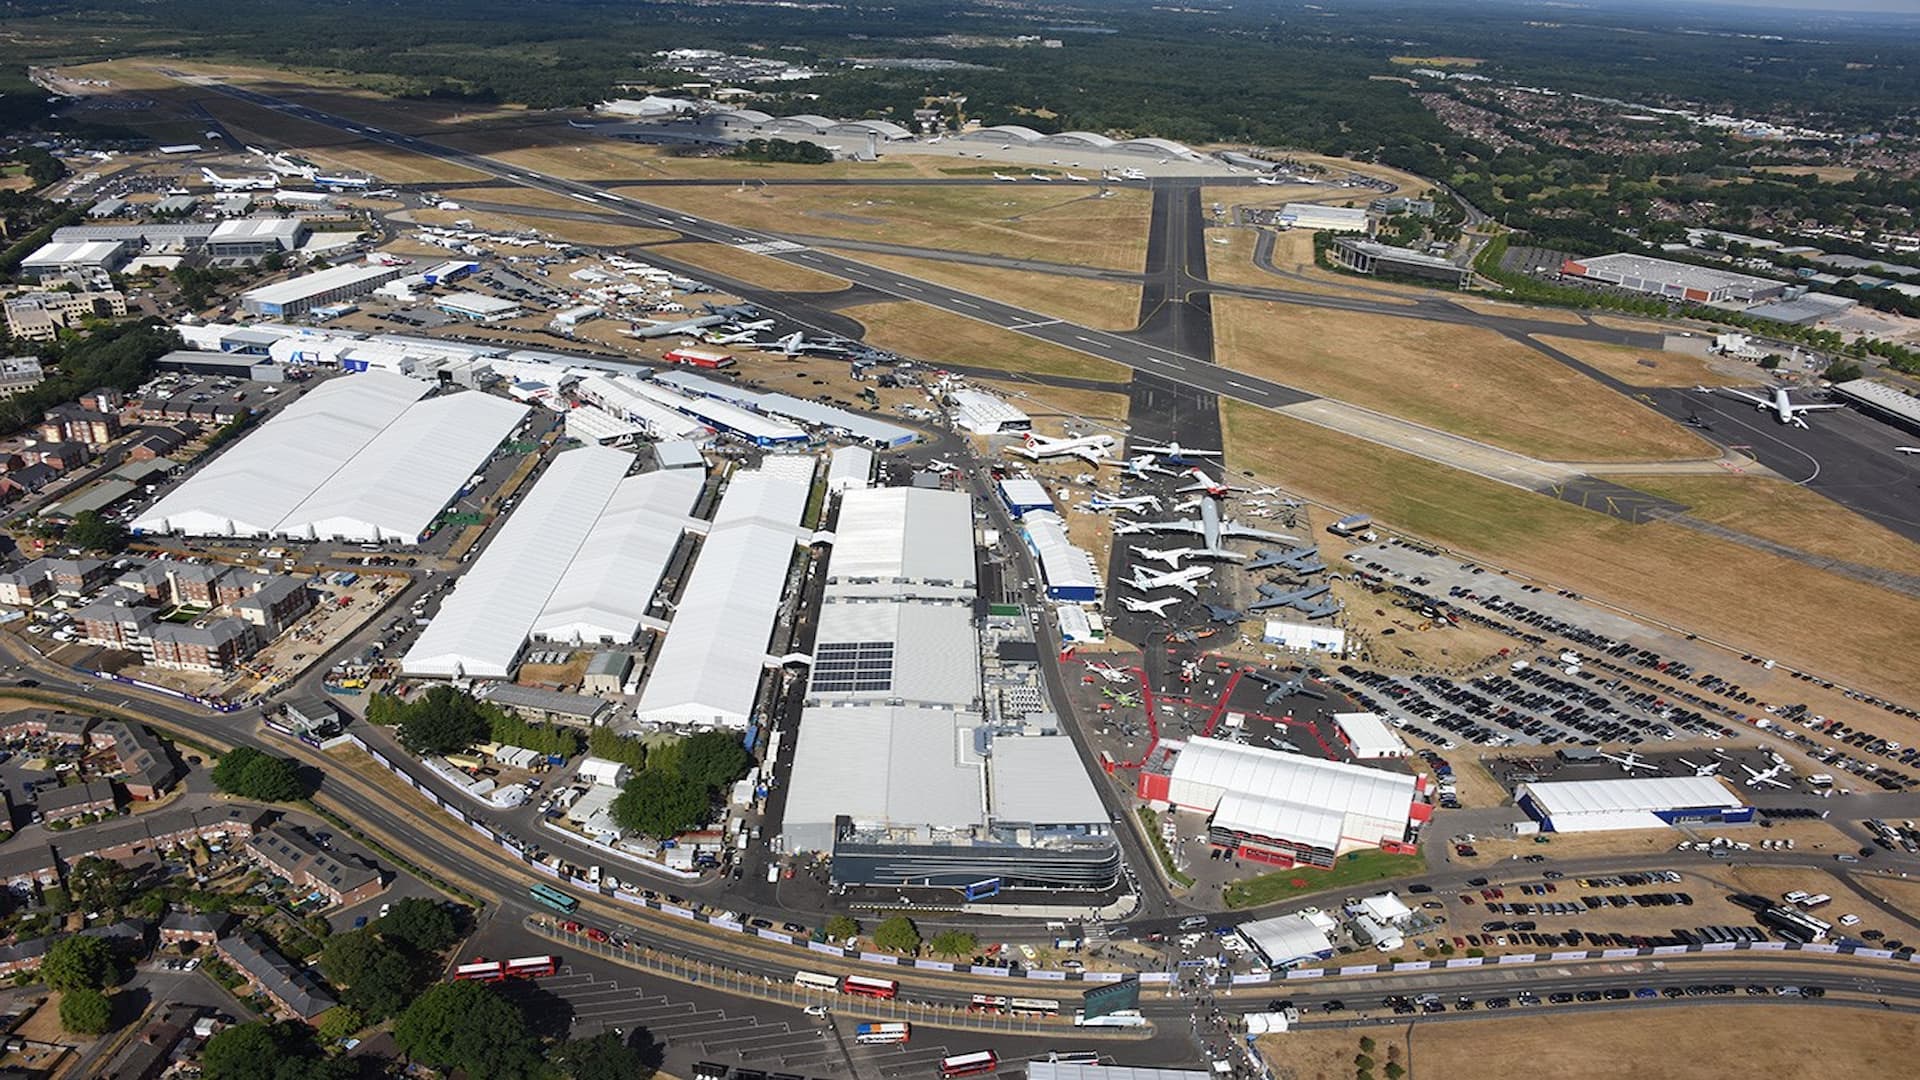 THE ITALIAN SPACE IN THE FOREGROUND AT THE FARNBOROUGH INTERNATIONAL AIRSHOW